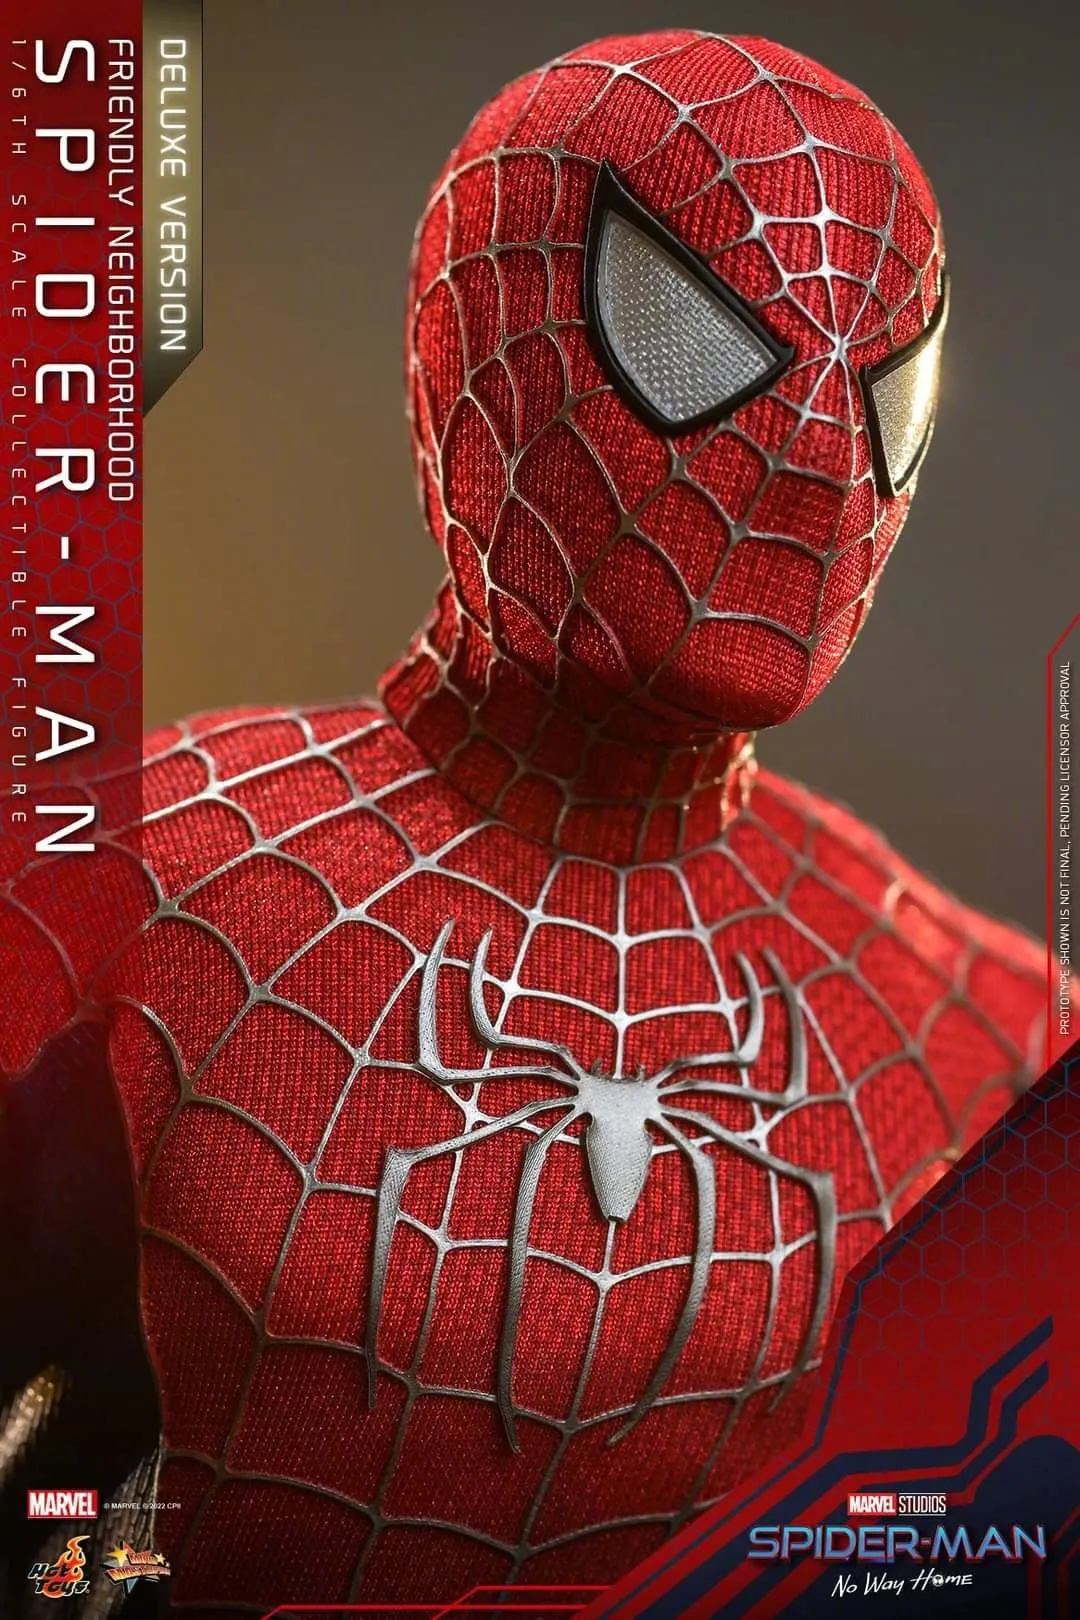 Tobey Maguire Edition Spider-Man's New Hot Toys Figure | FMV6